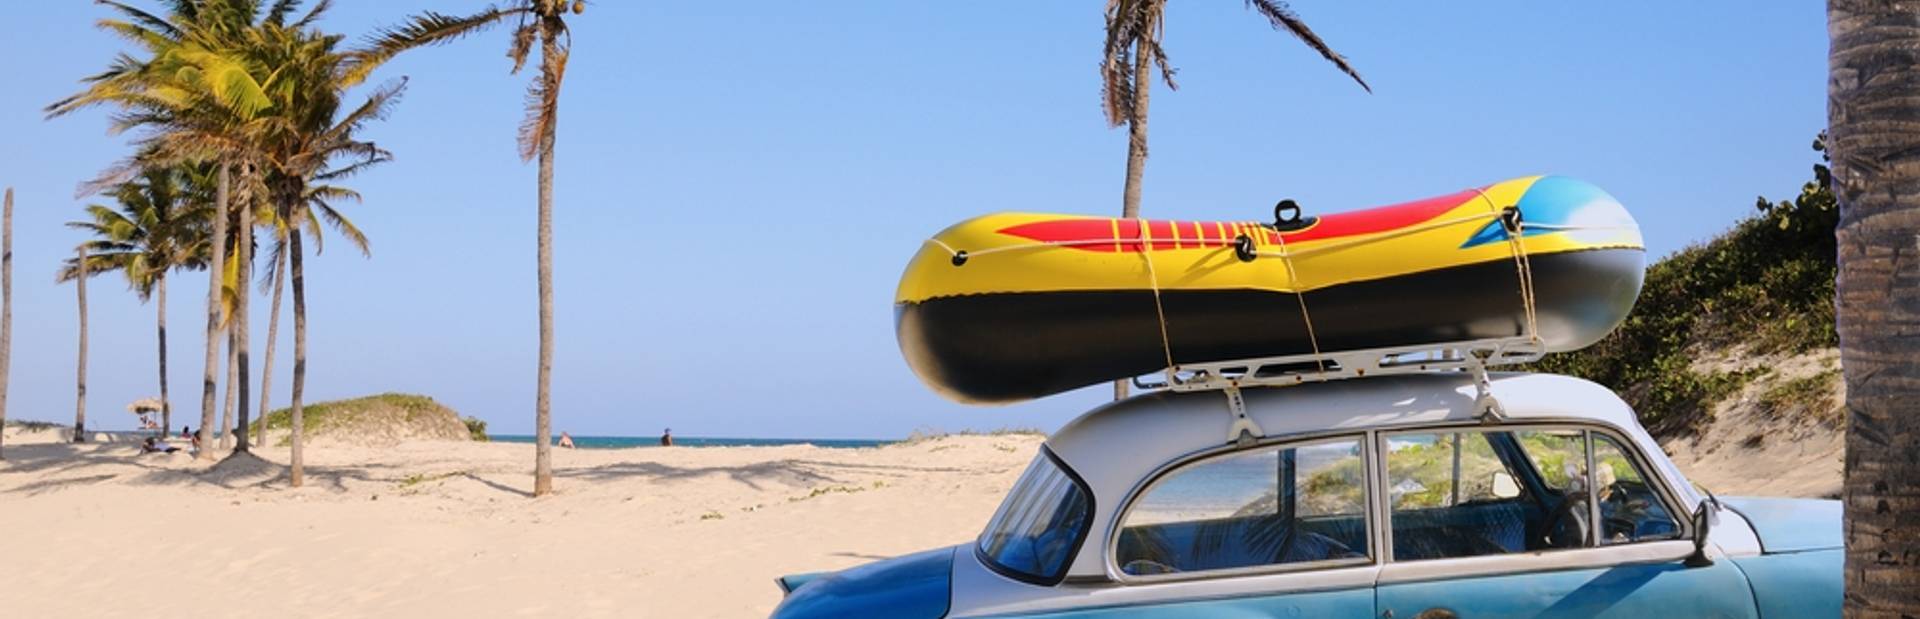 Old blue car with surfboard on the top parked on the beach with palm trees